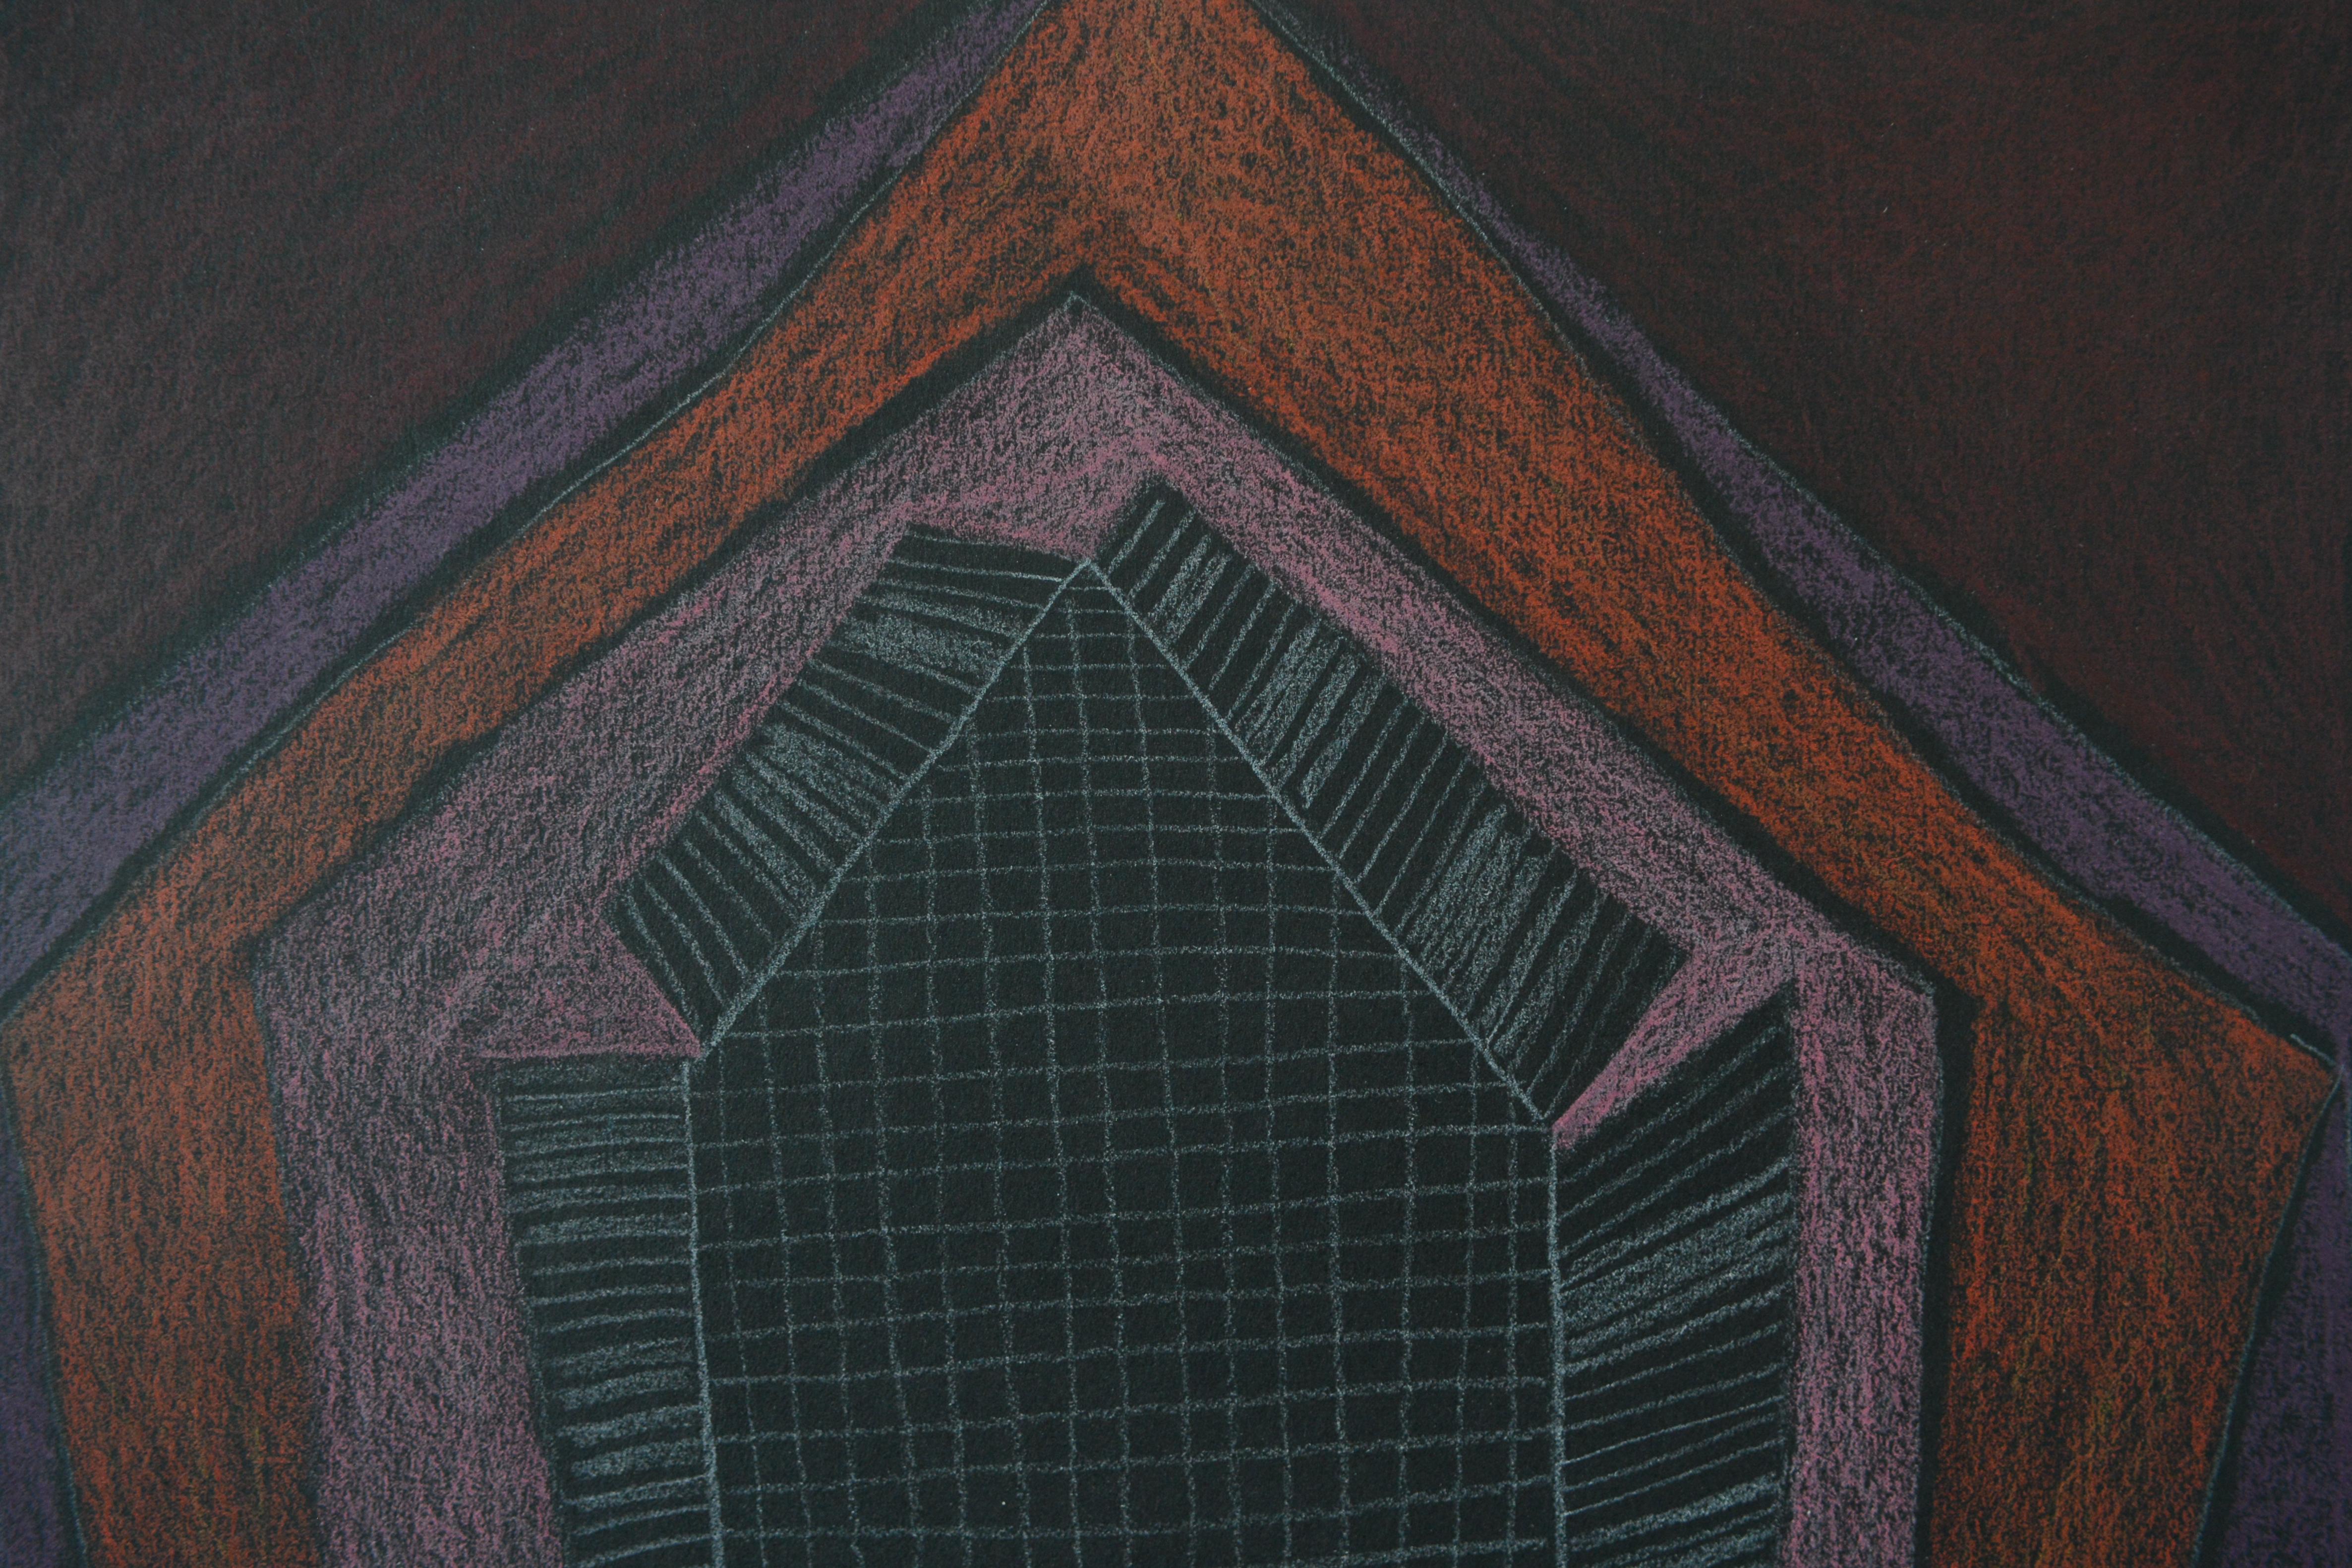 Opening Houses on Black 7, 2022. Coloured pencil on black paper, 20 x 20cm

Nicky Marais (b. 1962) is a Namibian artist, educator and activist. Marais is well-known for her abstract artworks created using a personal vocabulary of abstract forms and